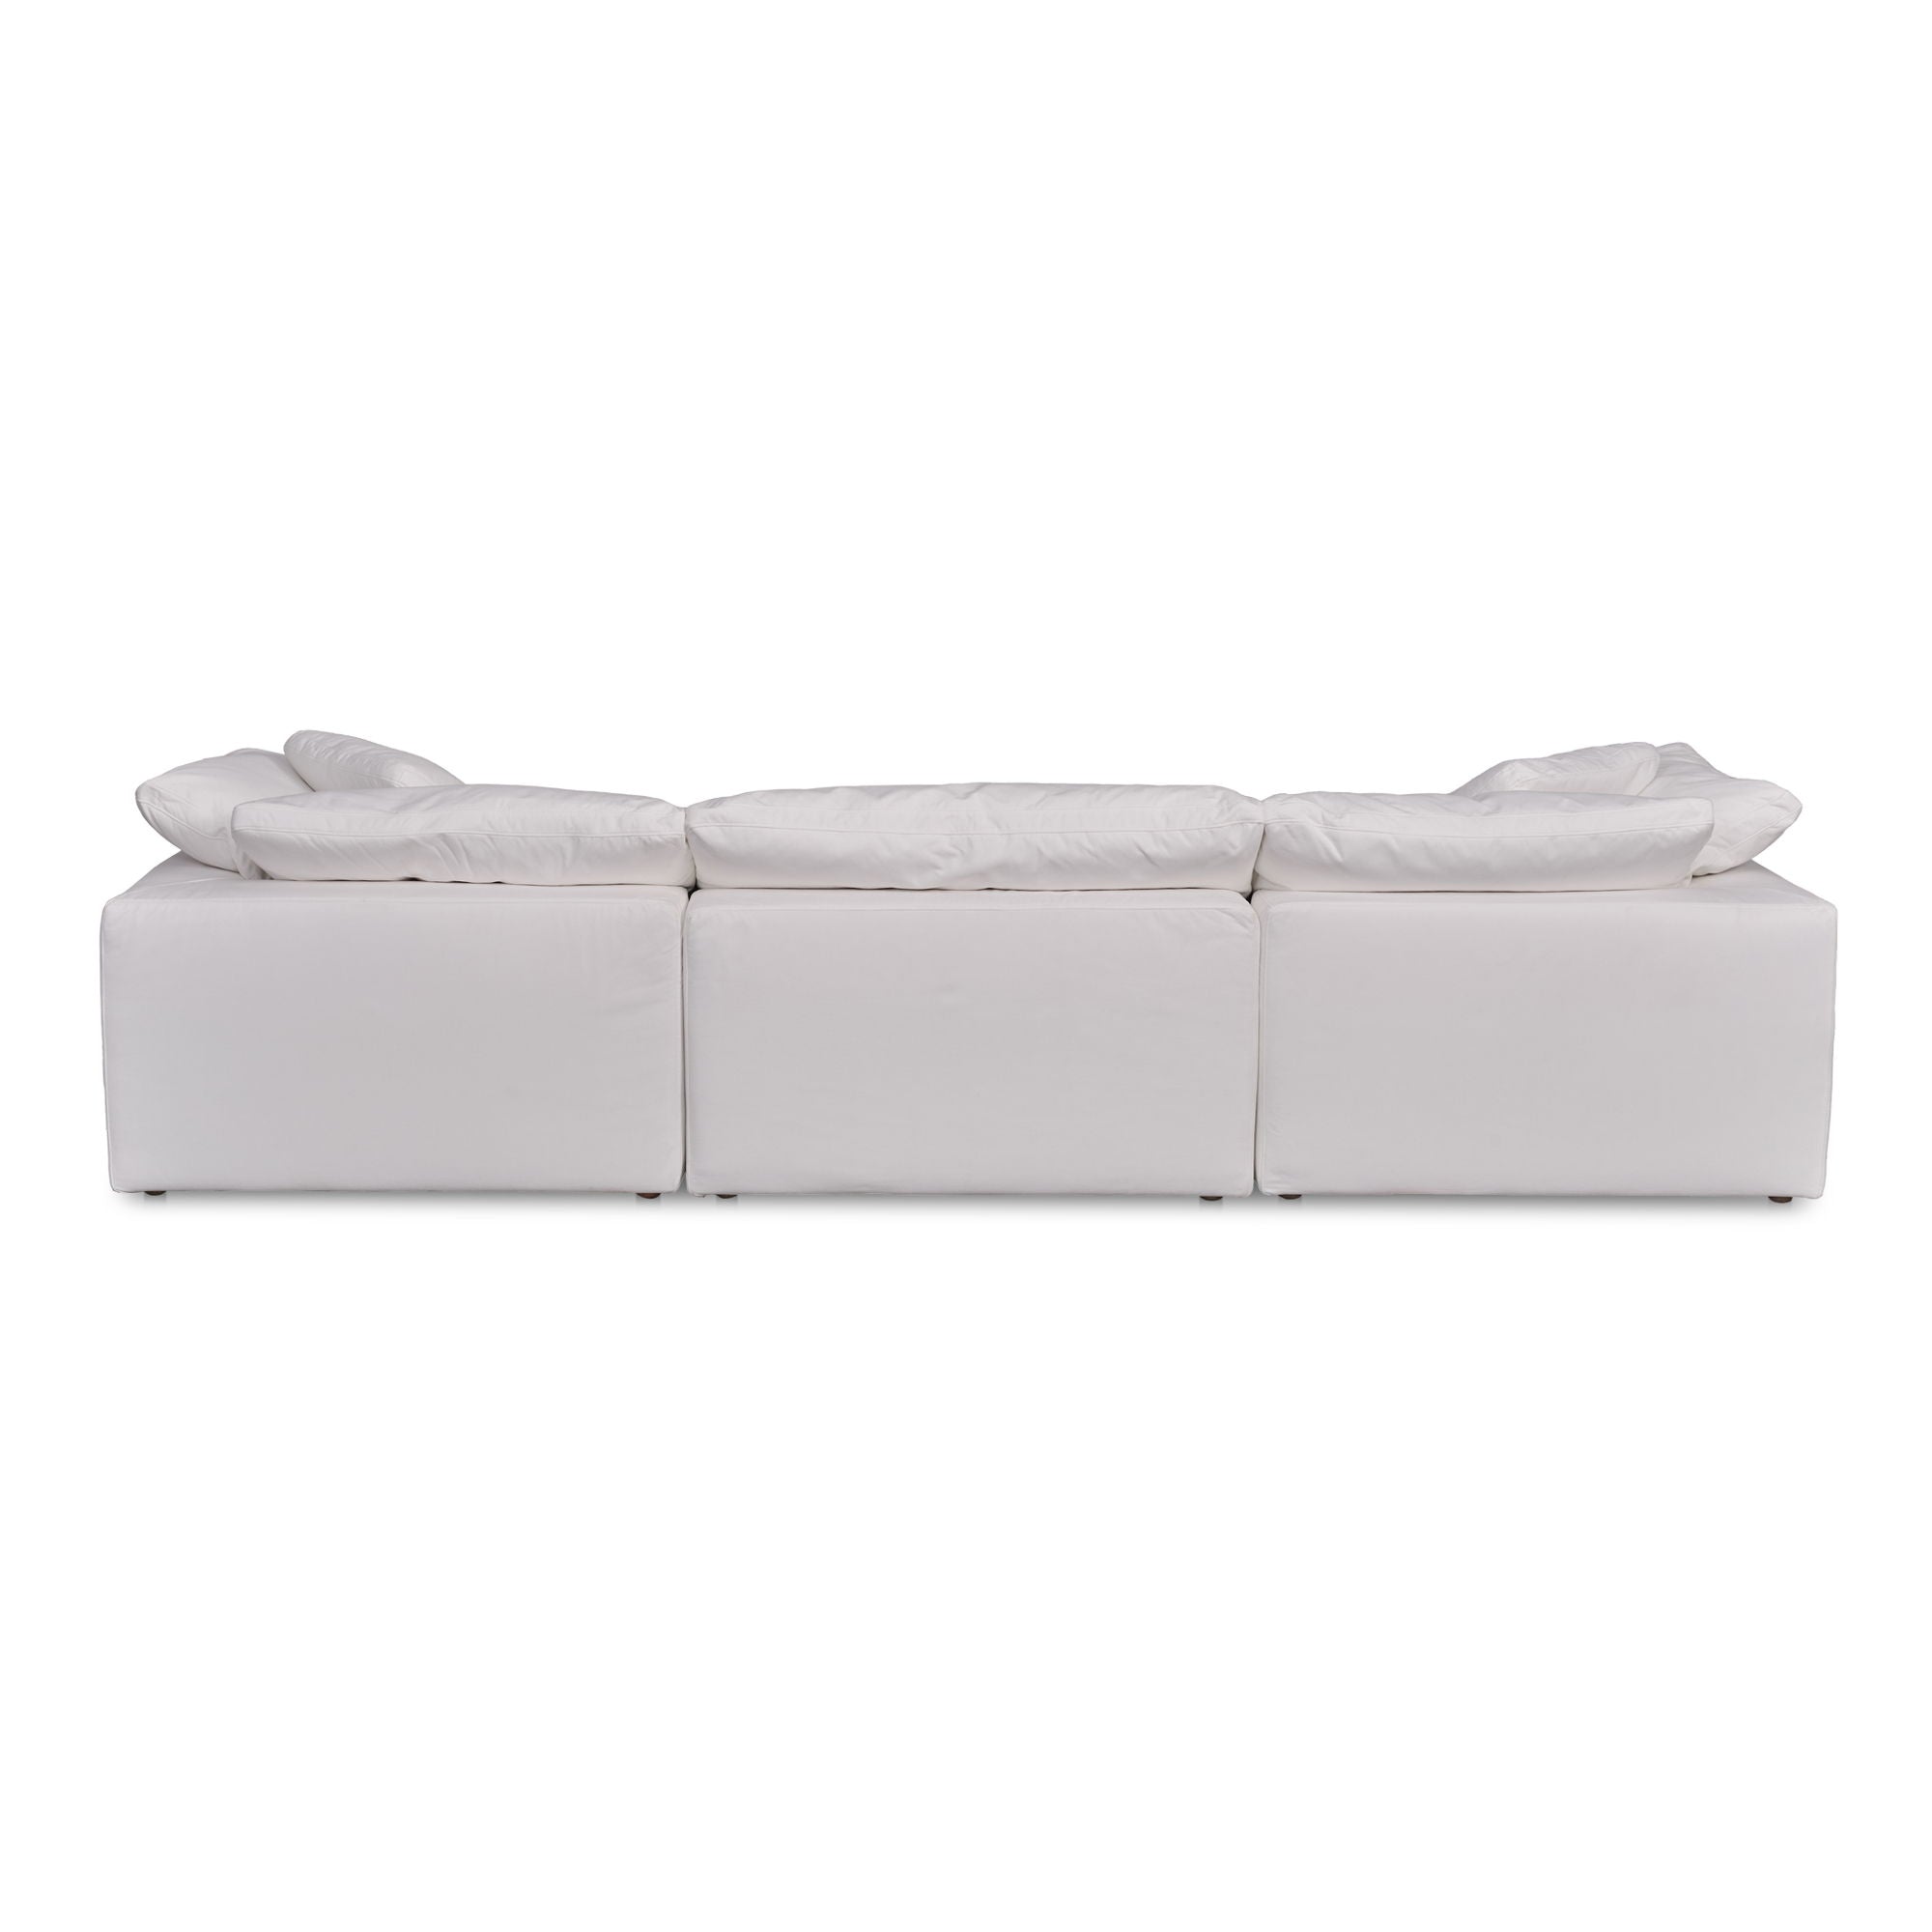 Clay - Modular Sofa Performance Fabric - White-Stationary Sectionals-American Furniture Outlet